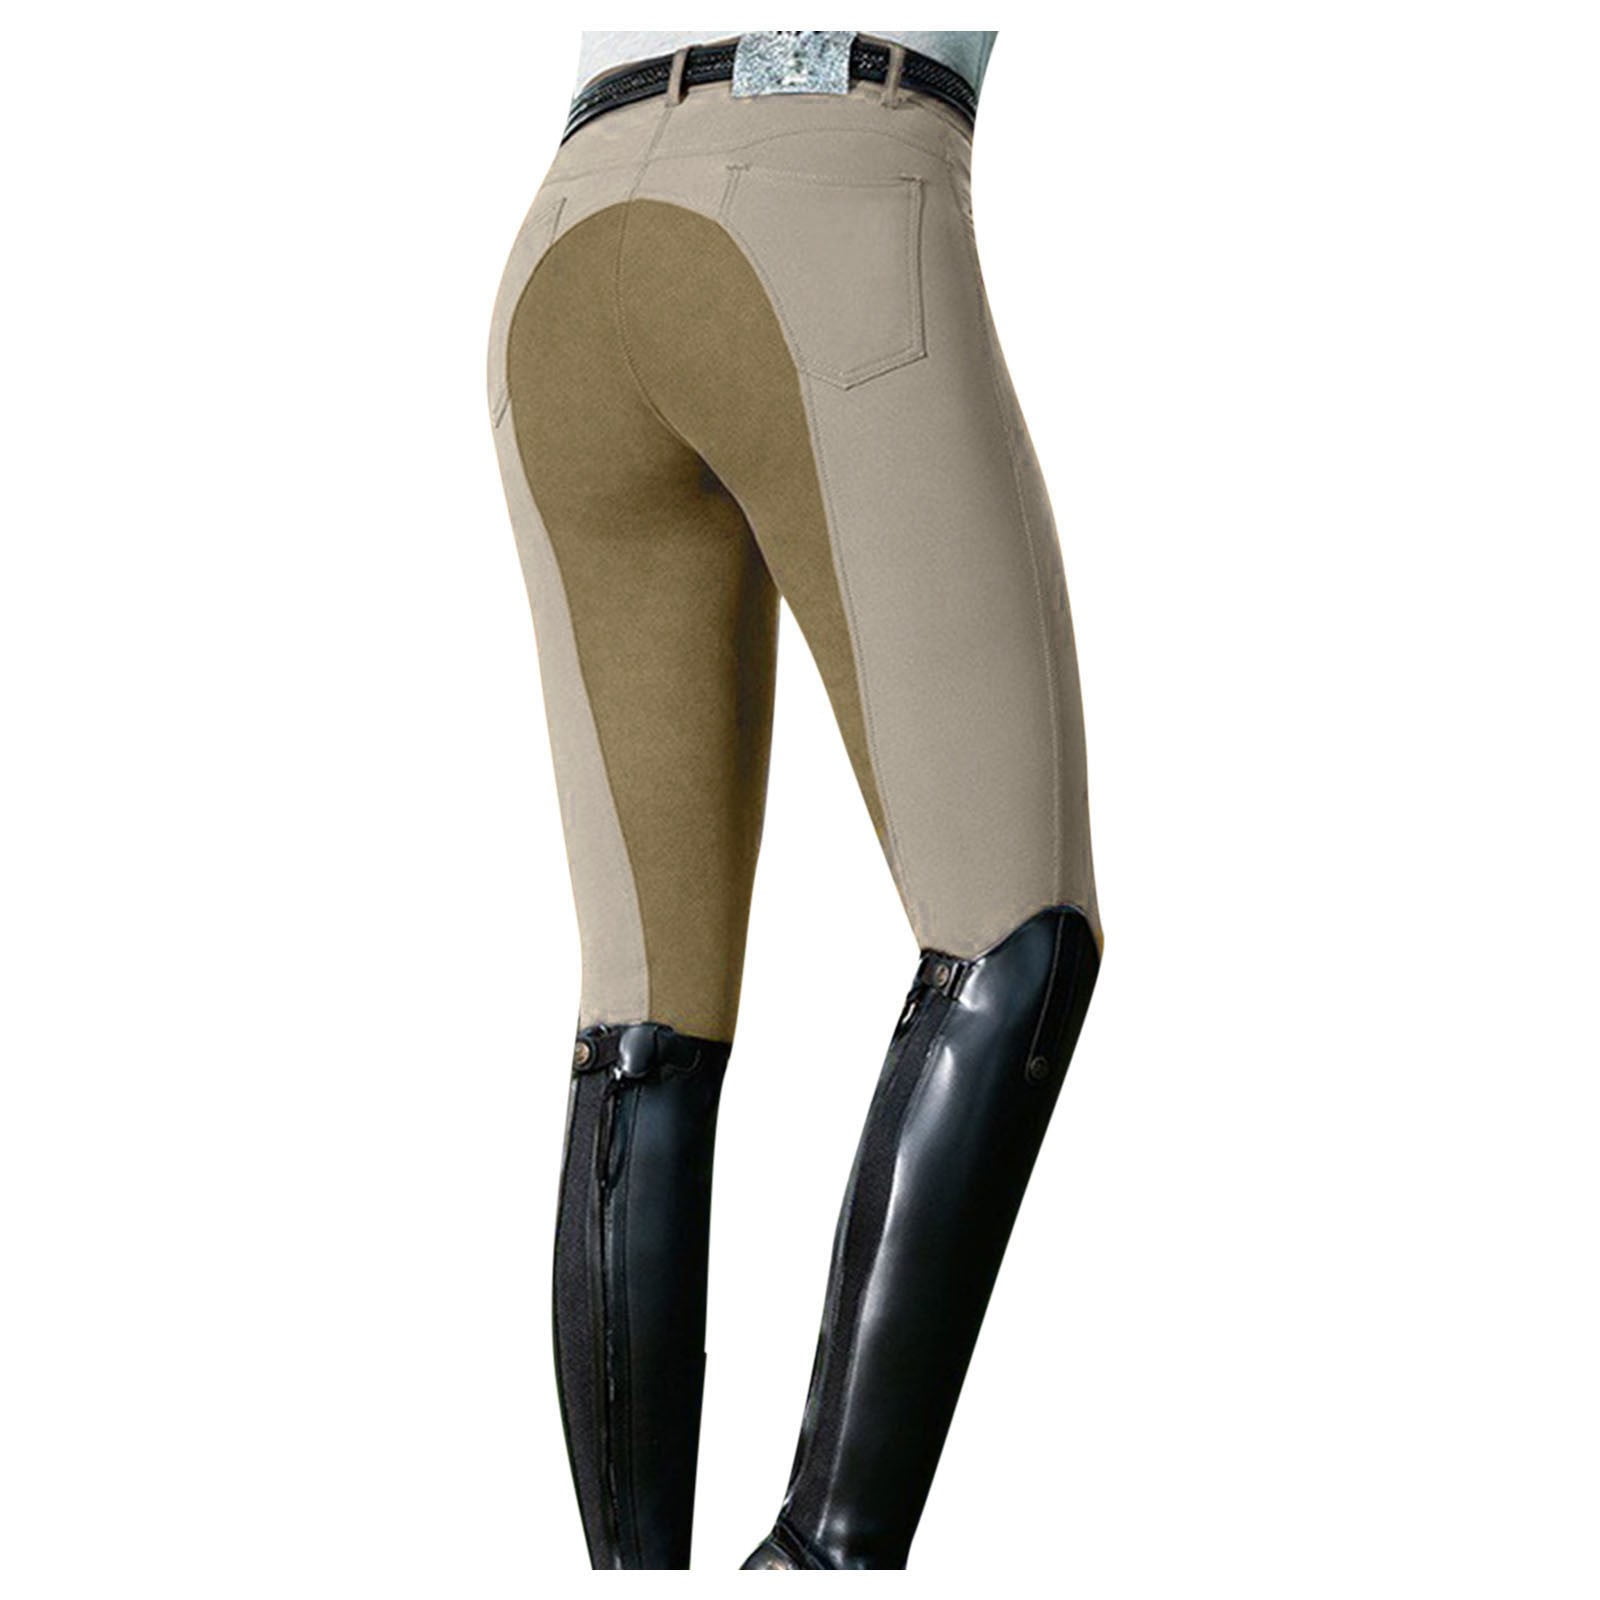 Women's Riding Pants Exercise High Waist Sports Riding Equestrian Trousers 